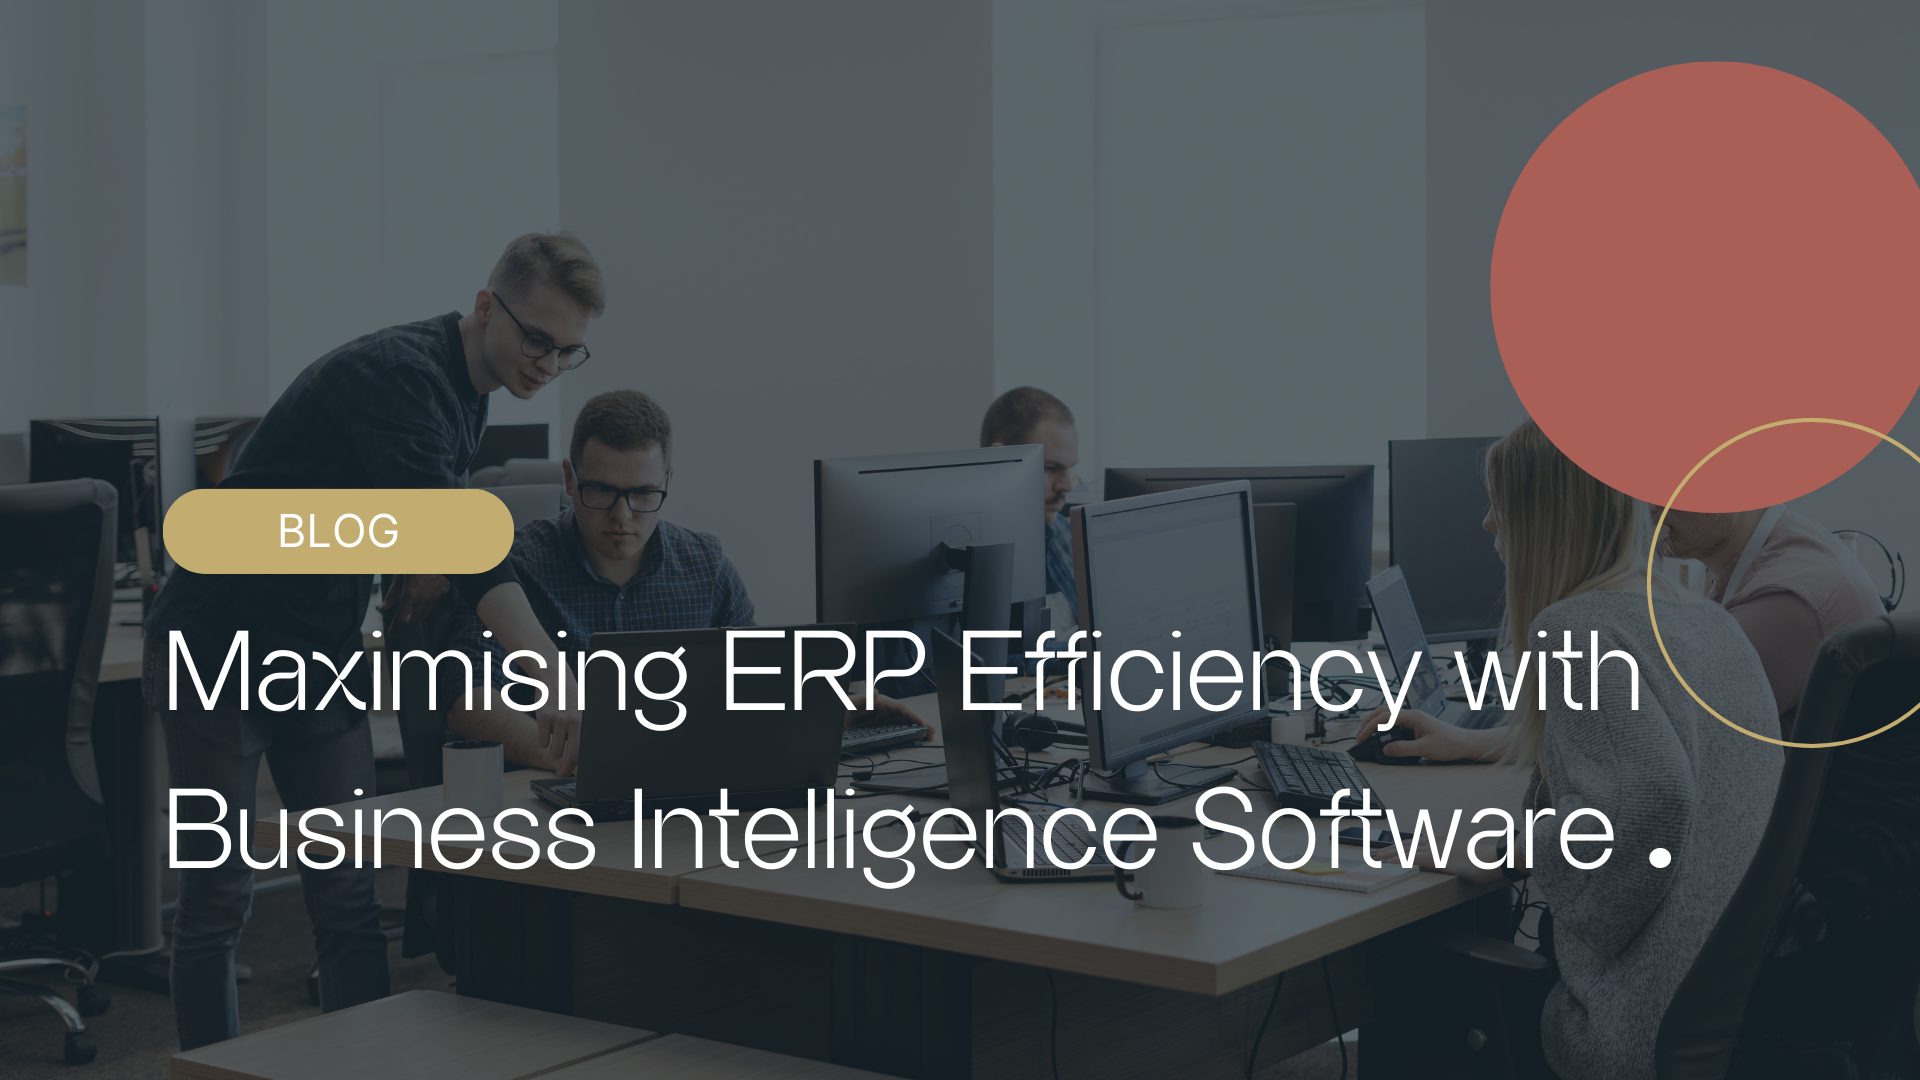 erp efficiency with business intelligence